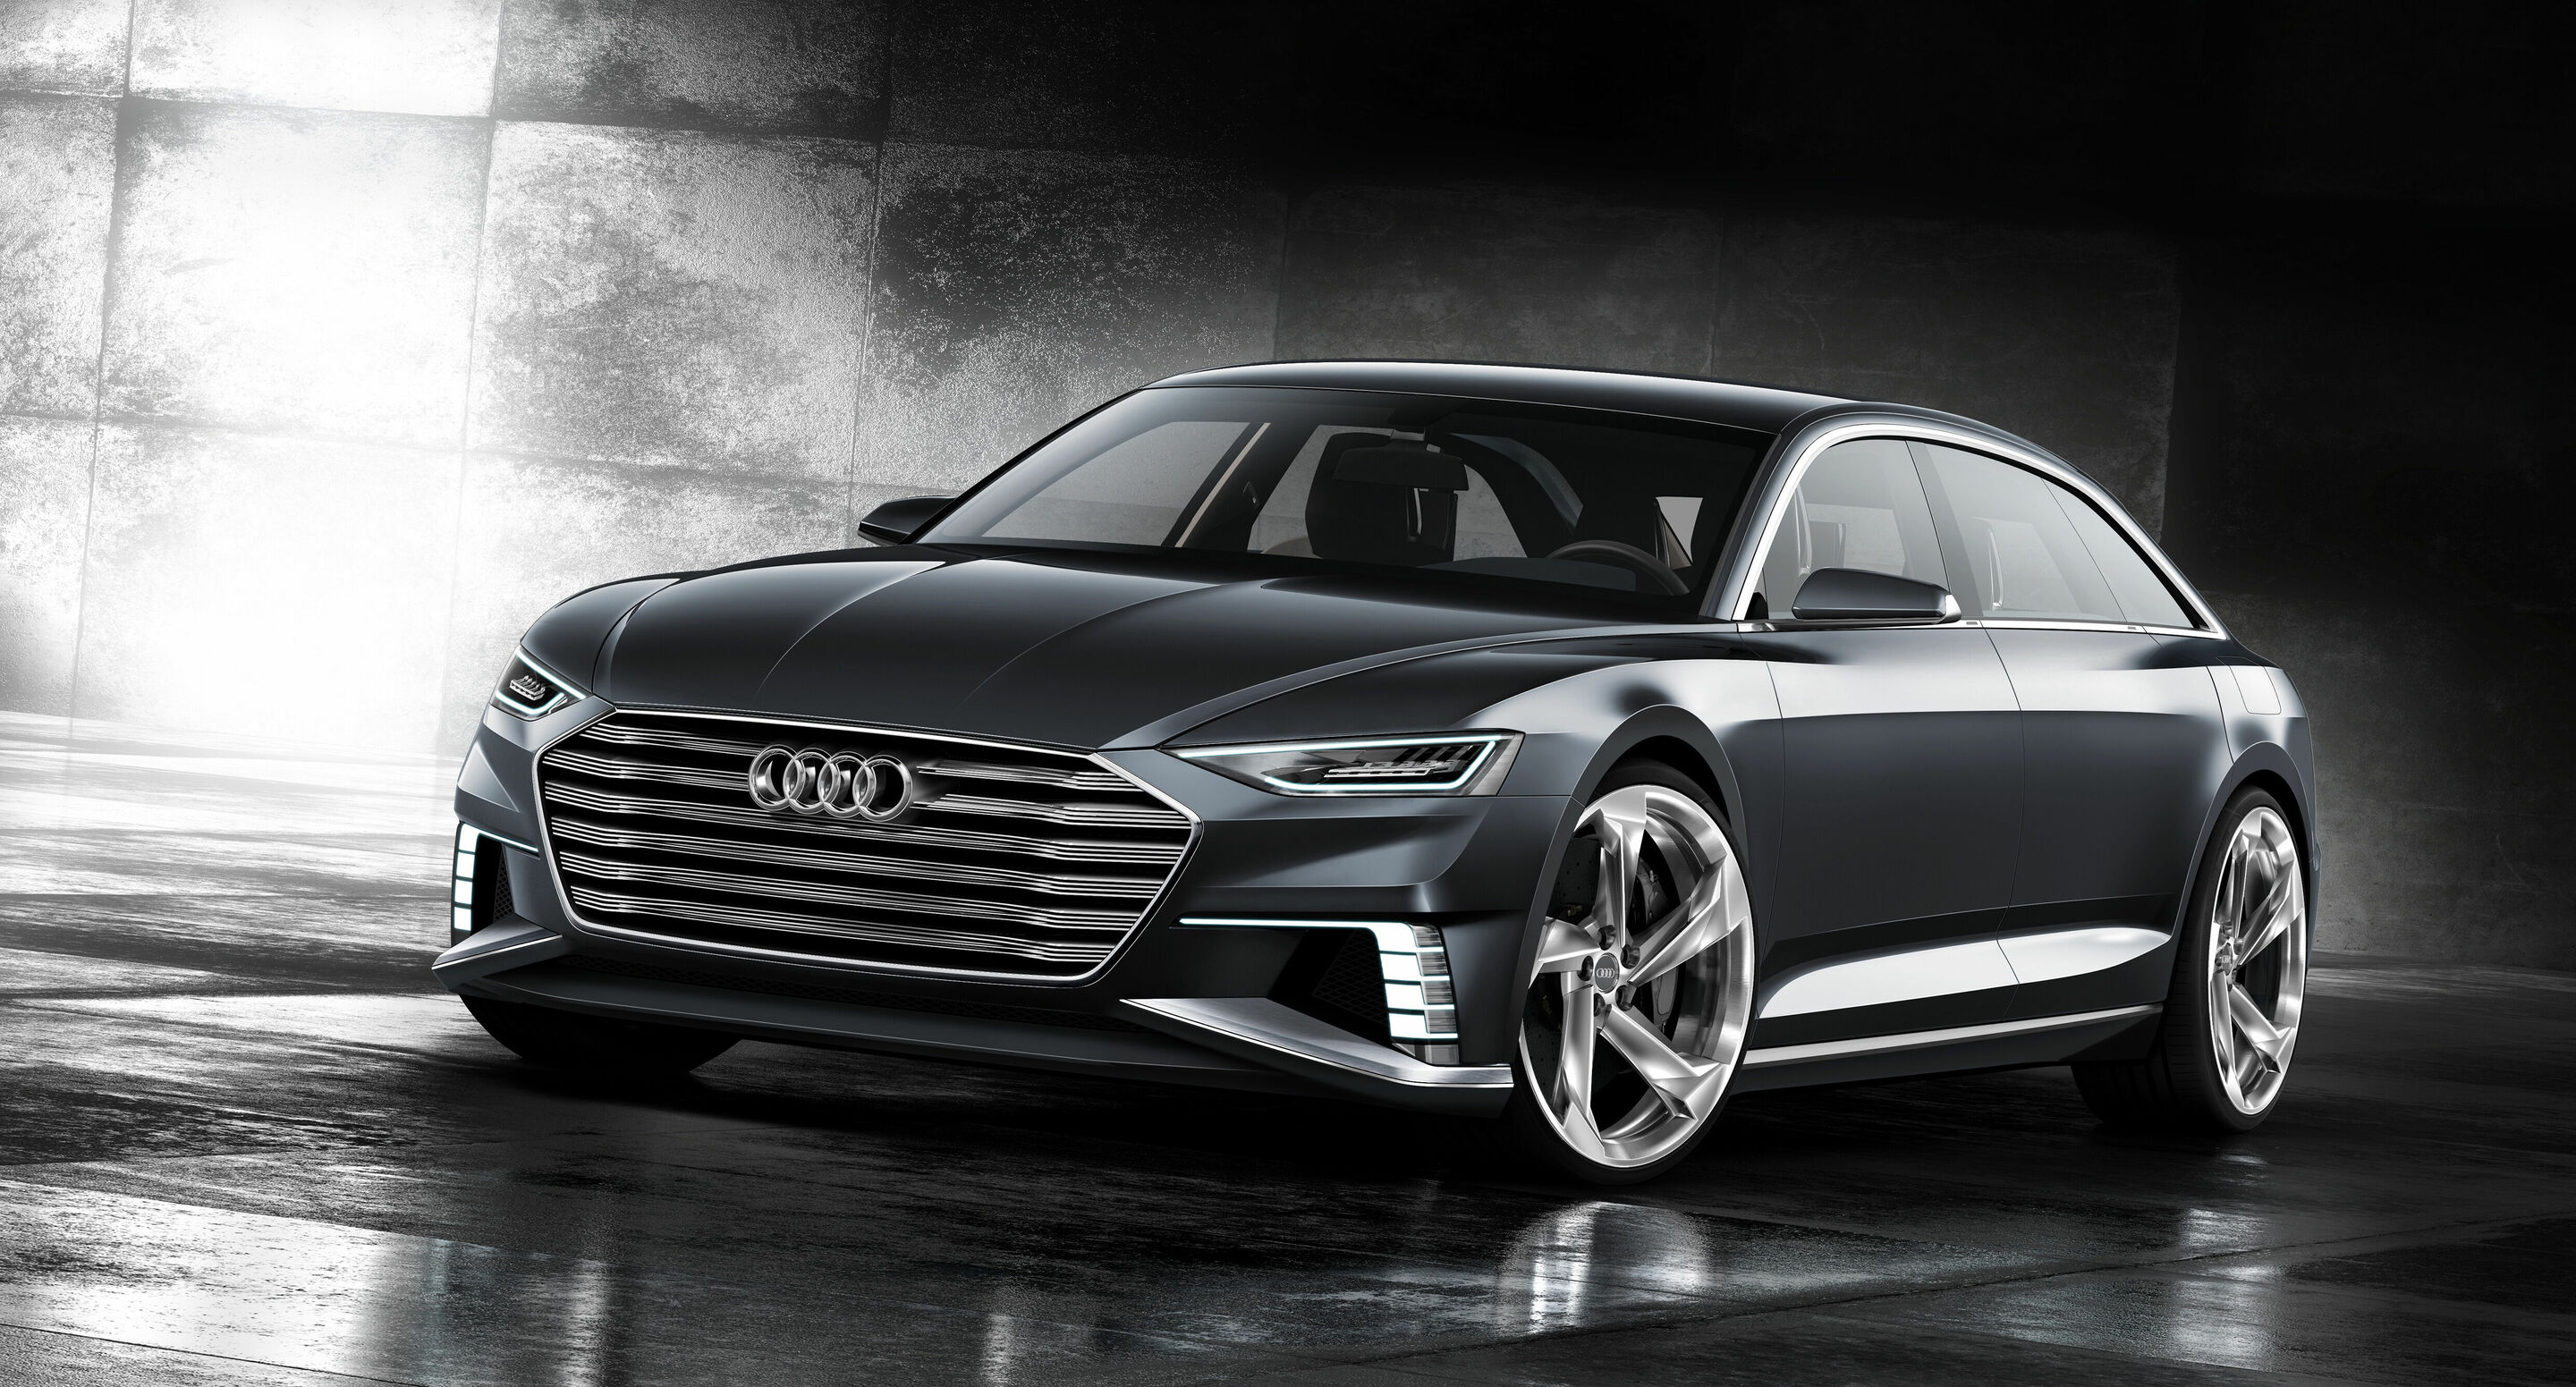 Sporty and elegant, versatile and connected – the Audi prologue Avant show  car